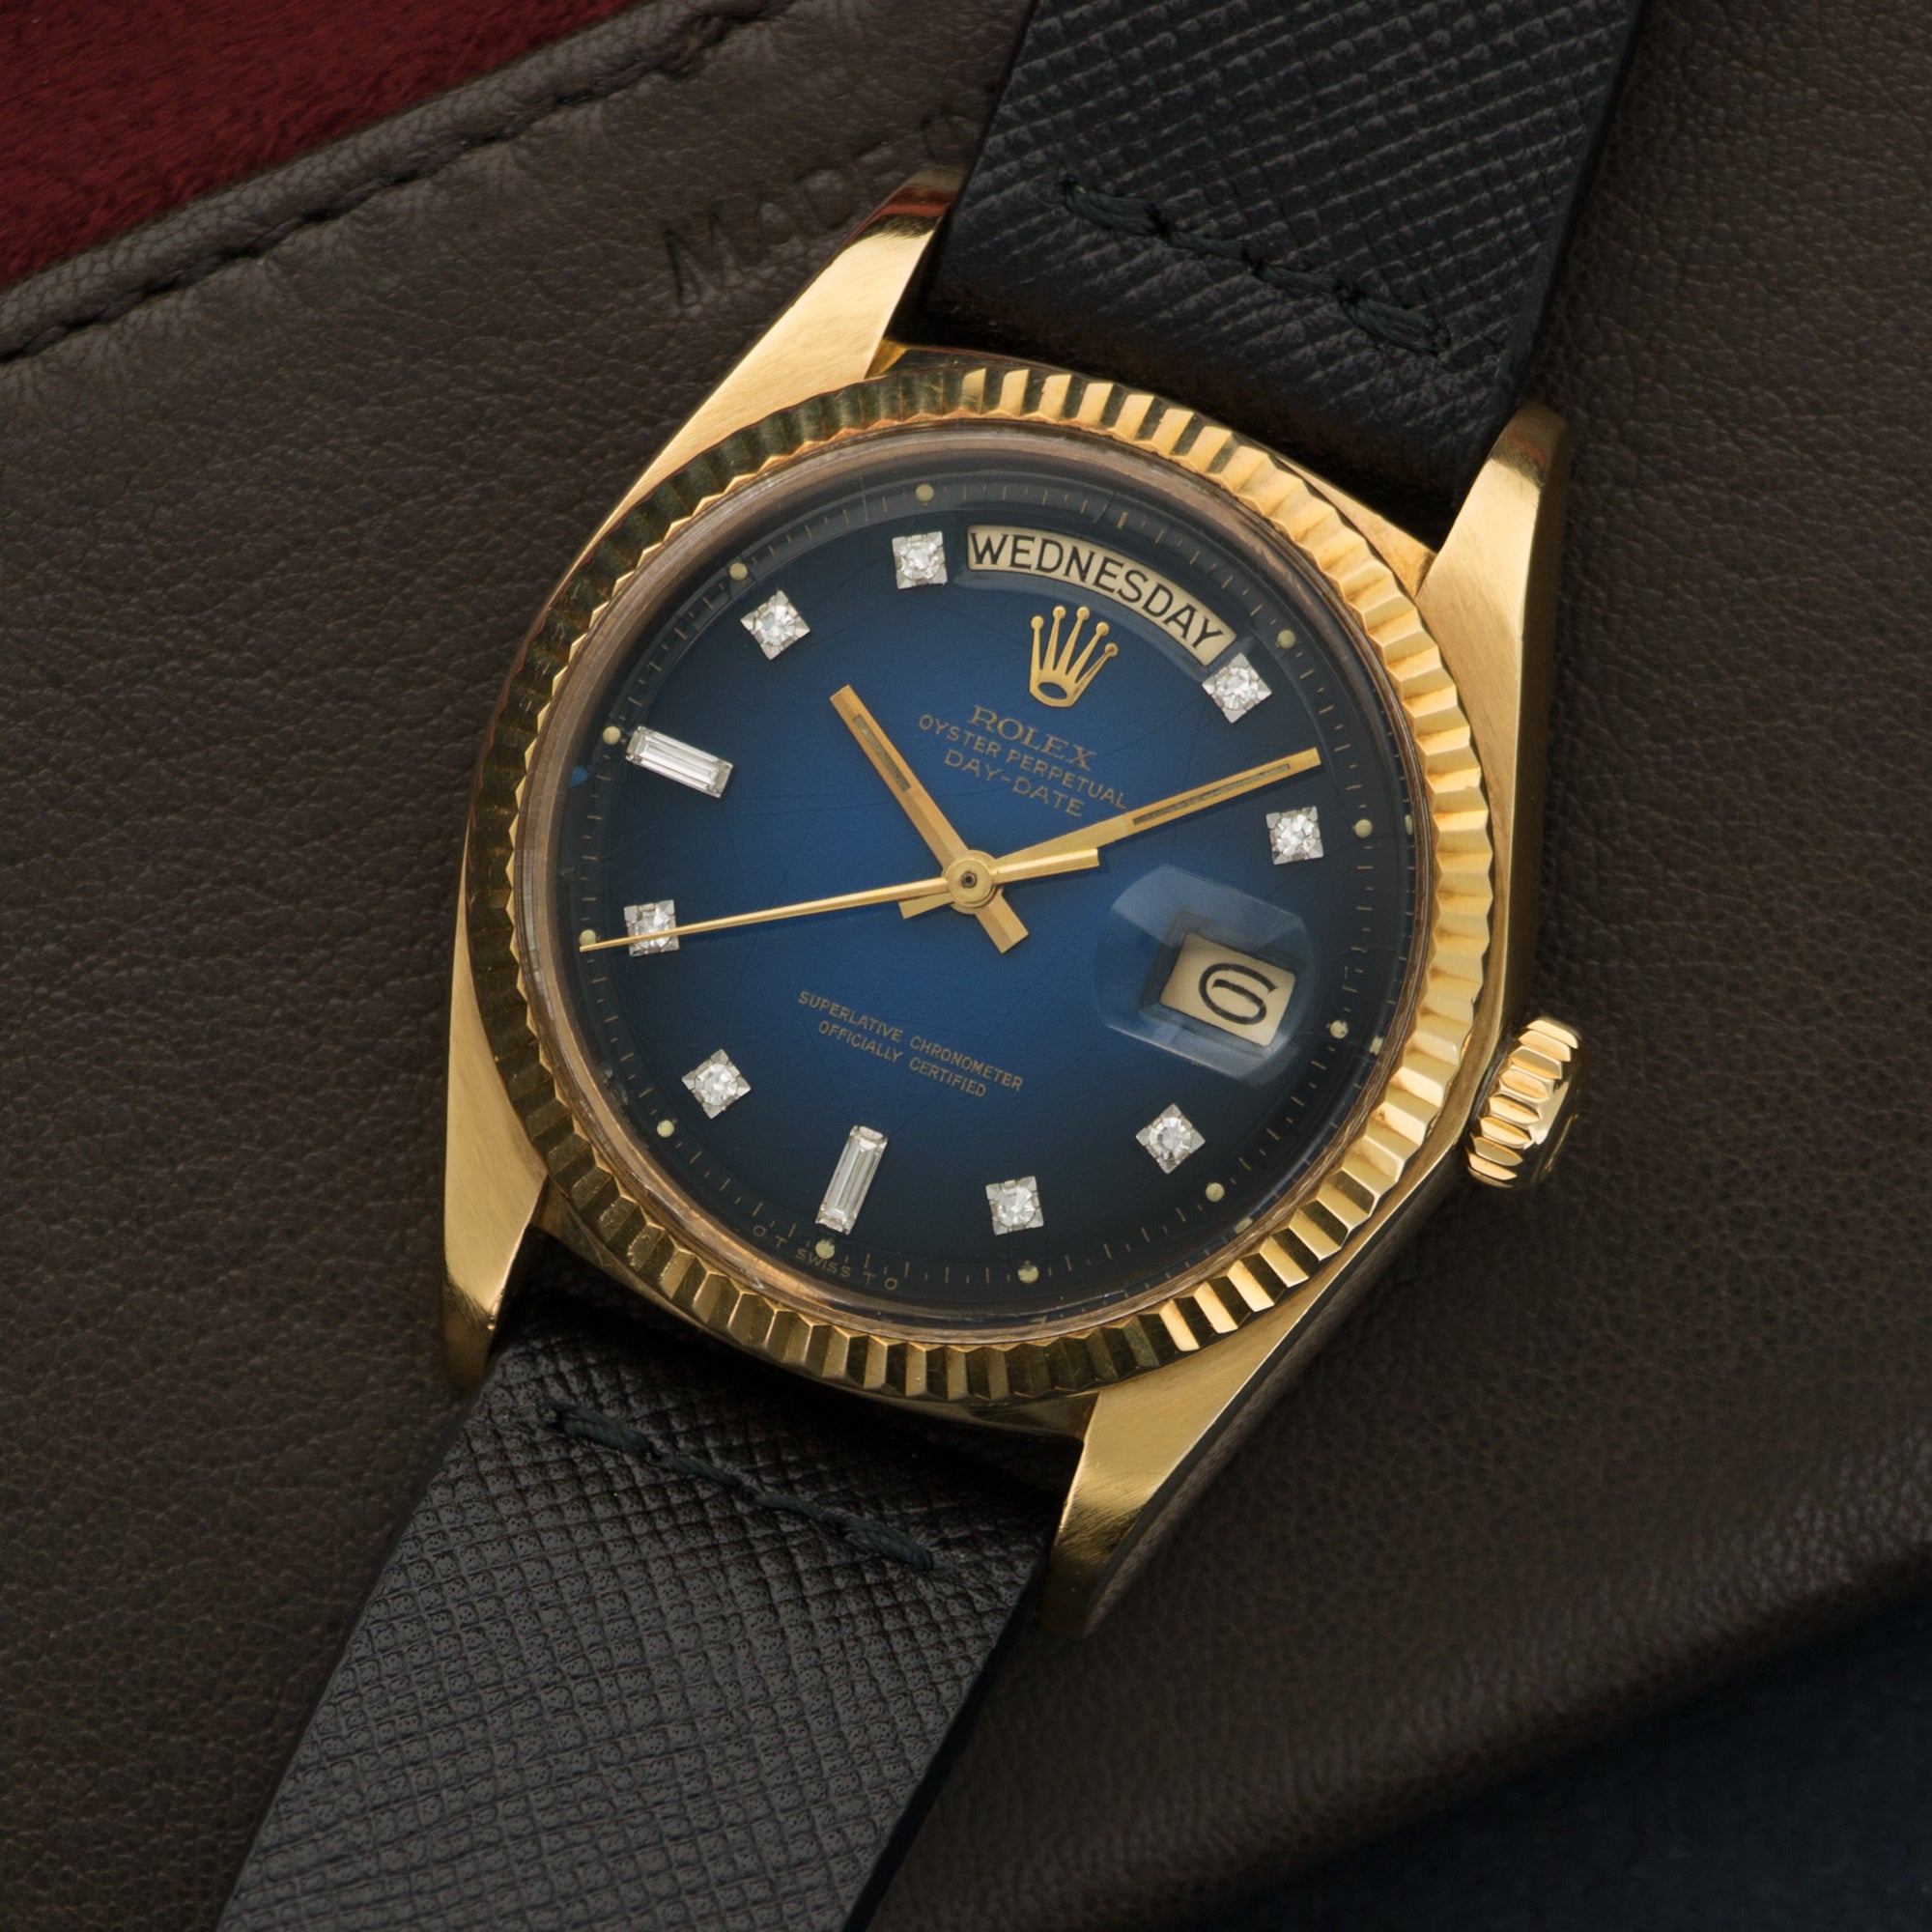 Rolex - Rolex Day-Date Yellow Gold with Blue Vignette and Diamond Dial on Strap - The Keystone Watches